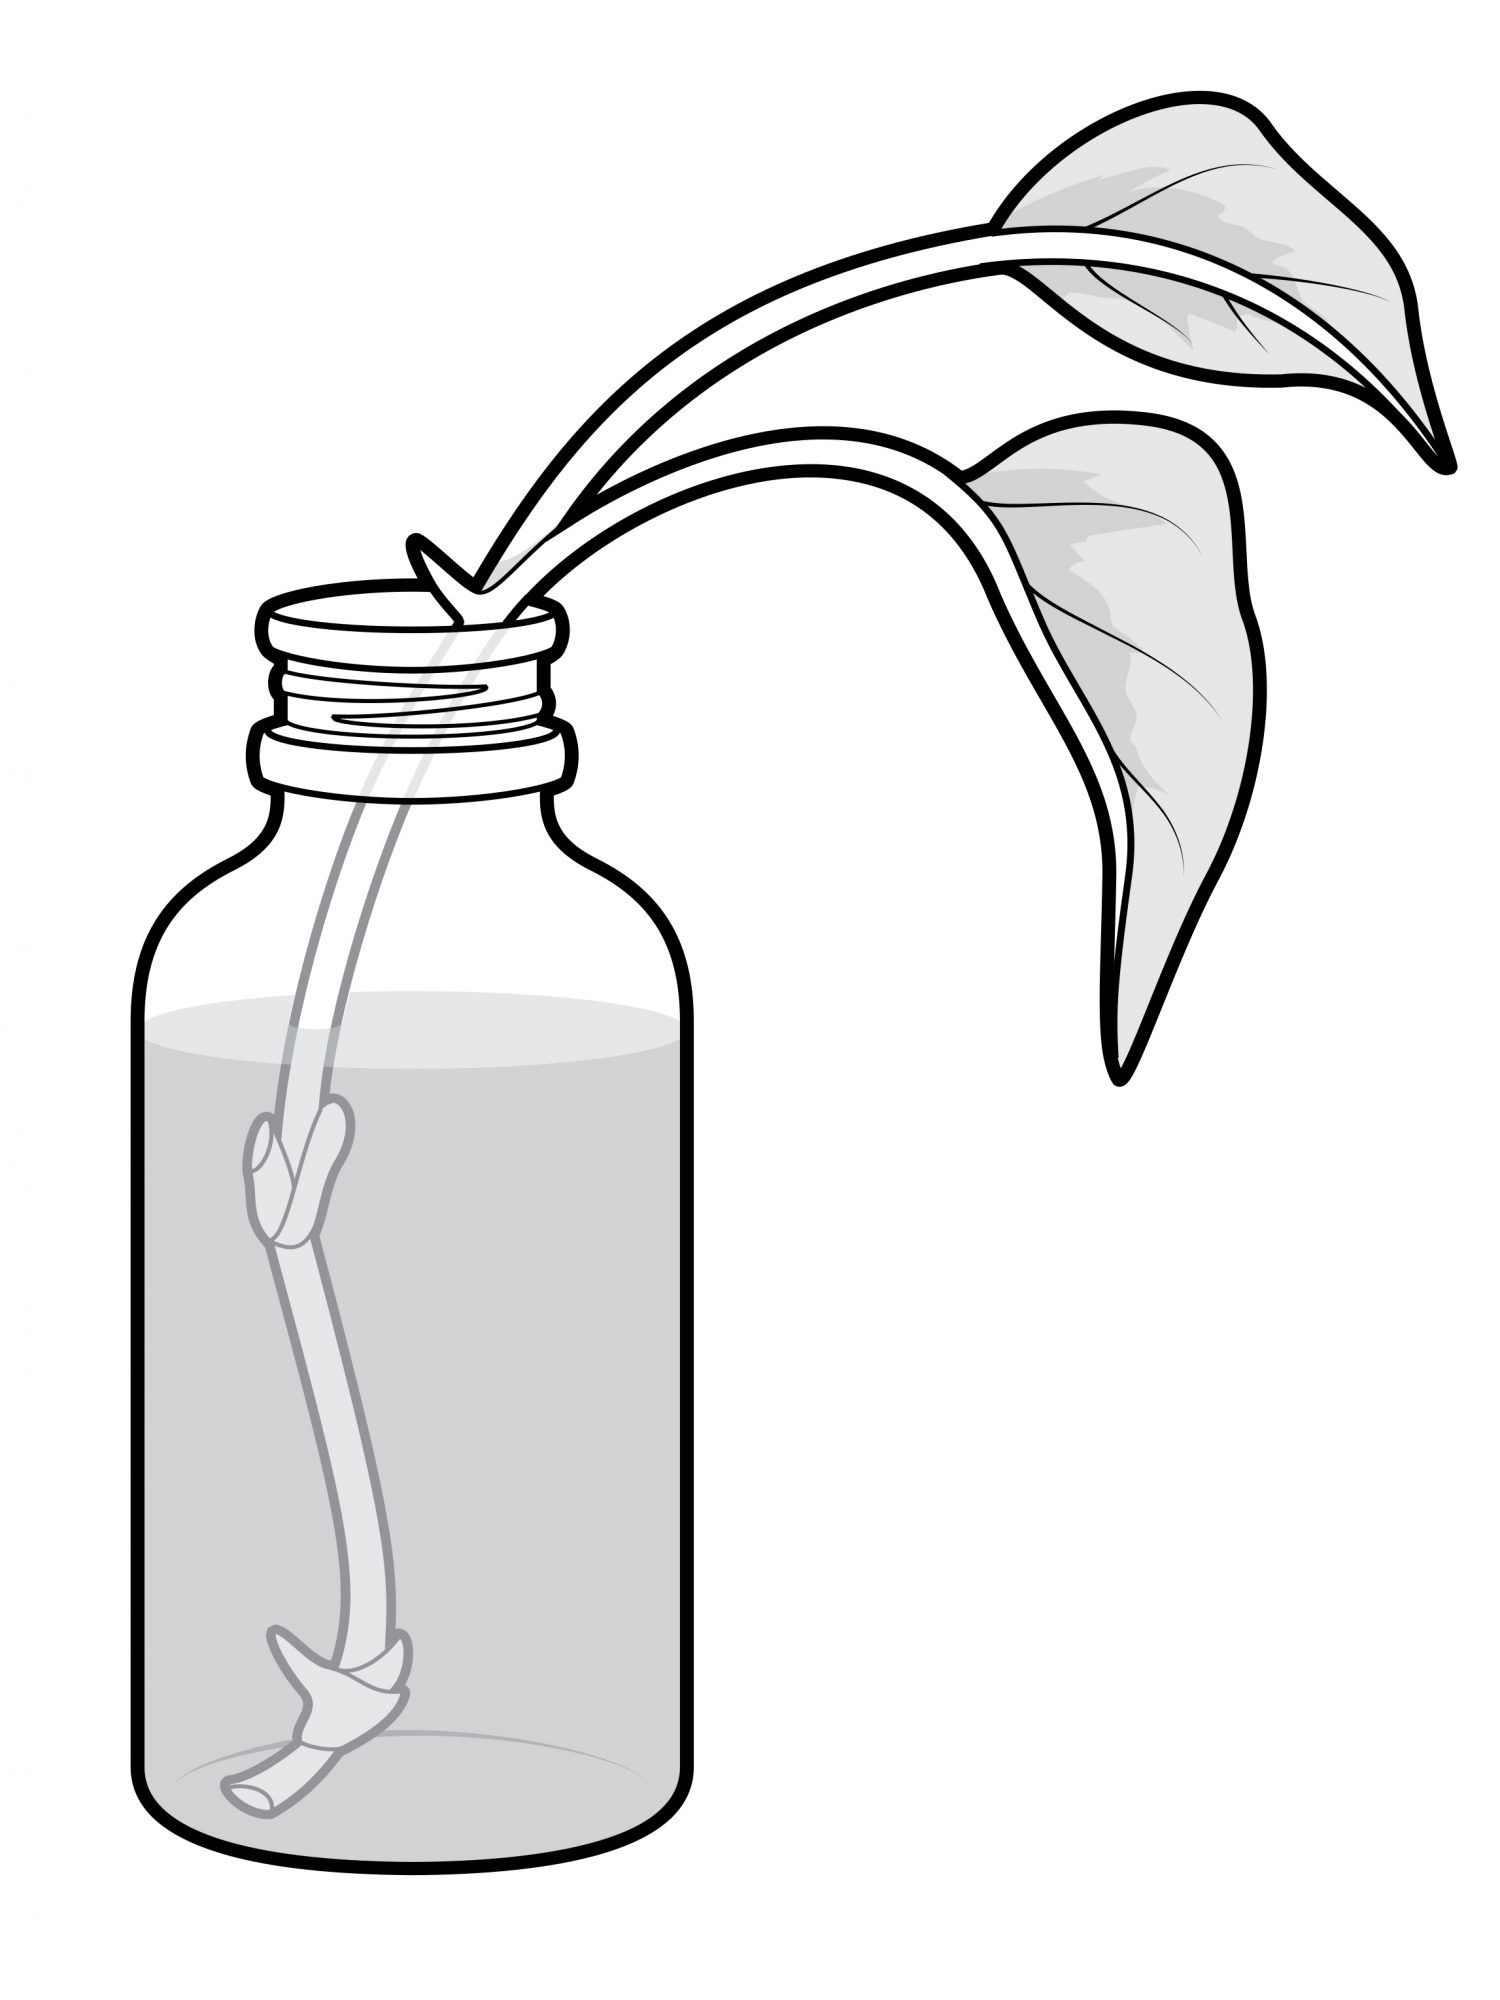 put it in water cuttings plant illustration